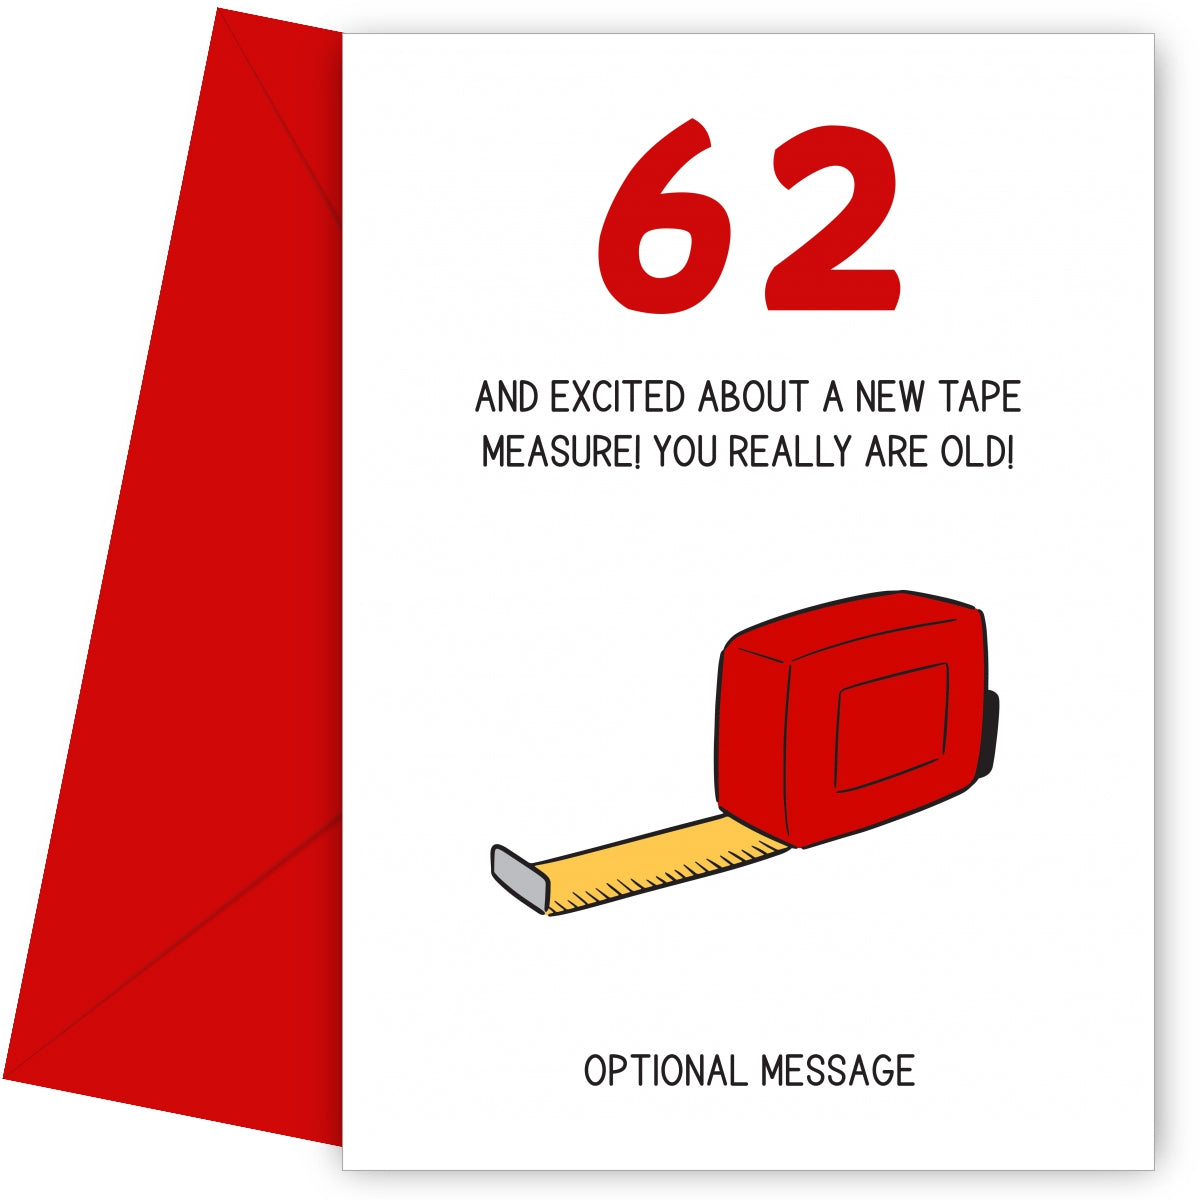 Happy 62nd Birthday Card - Excited About Tape Measure!